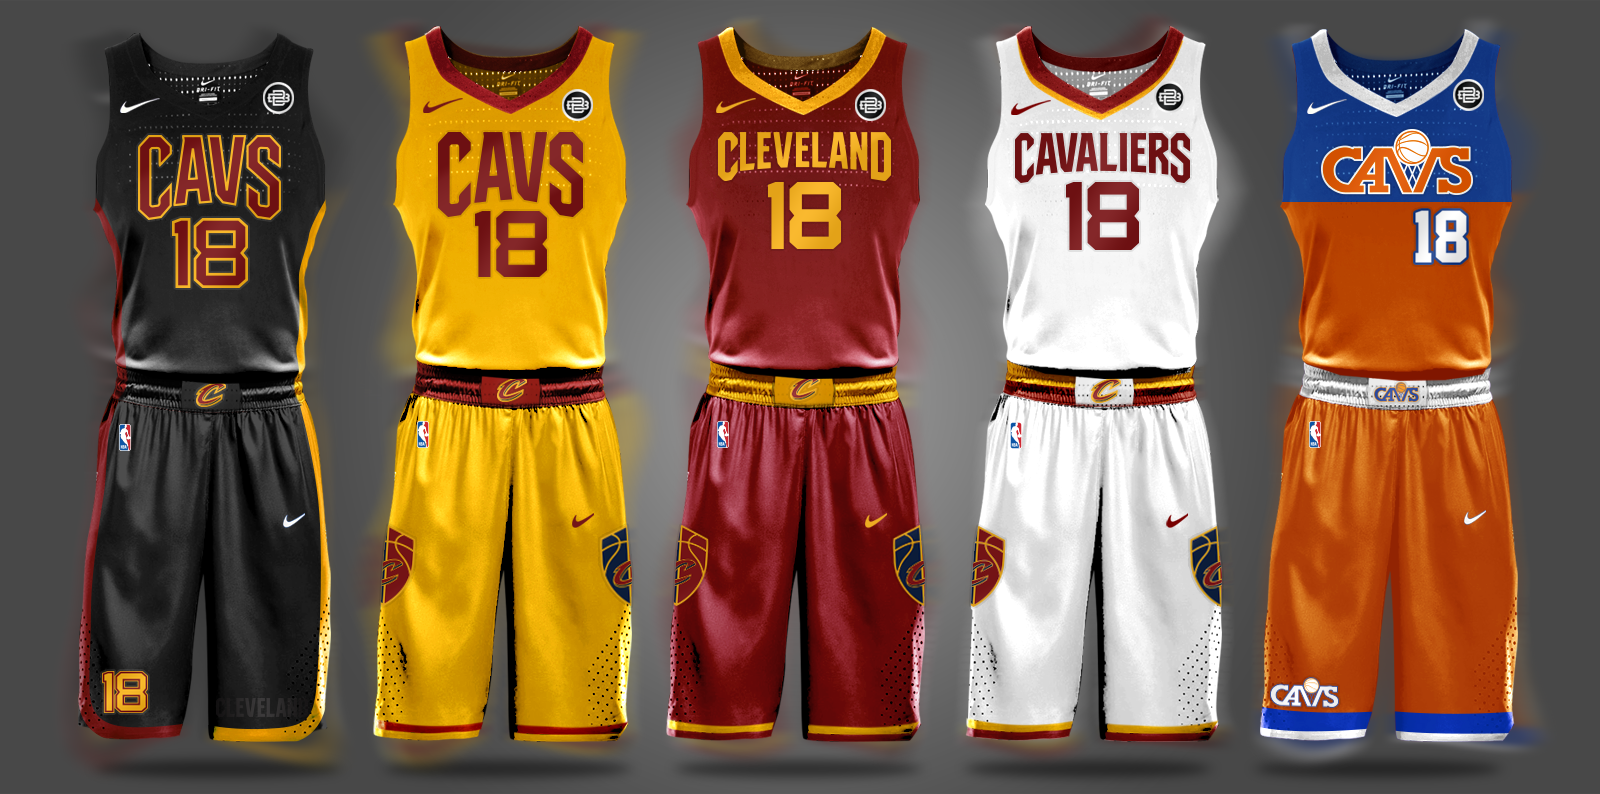 NBA, NFL, and MLB Building Community Through New Uniforms – The